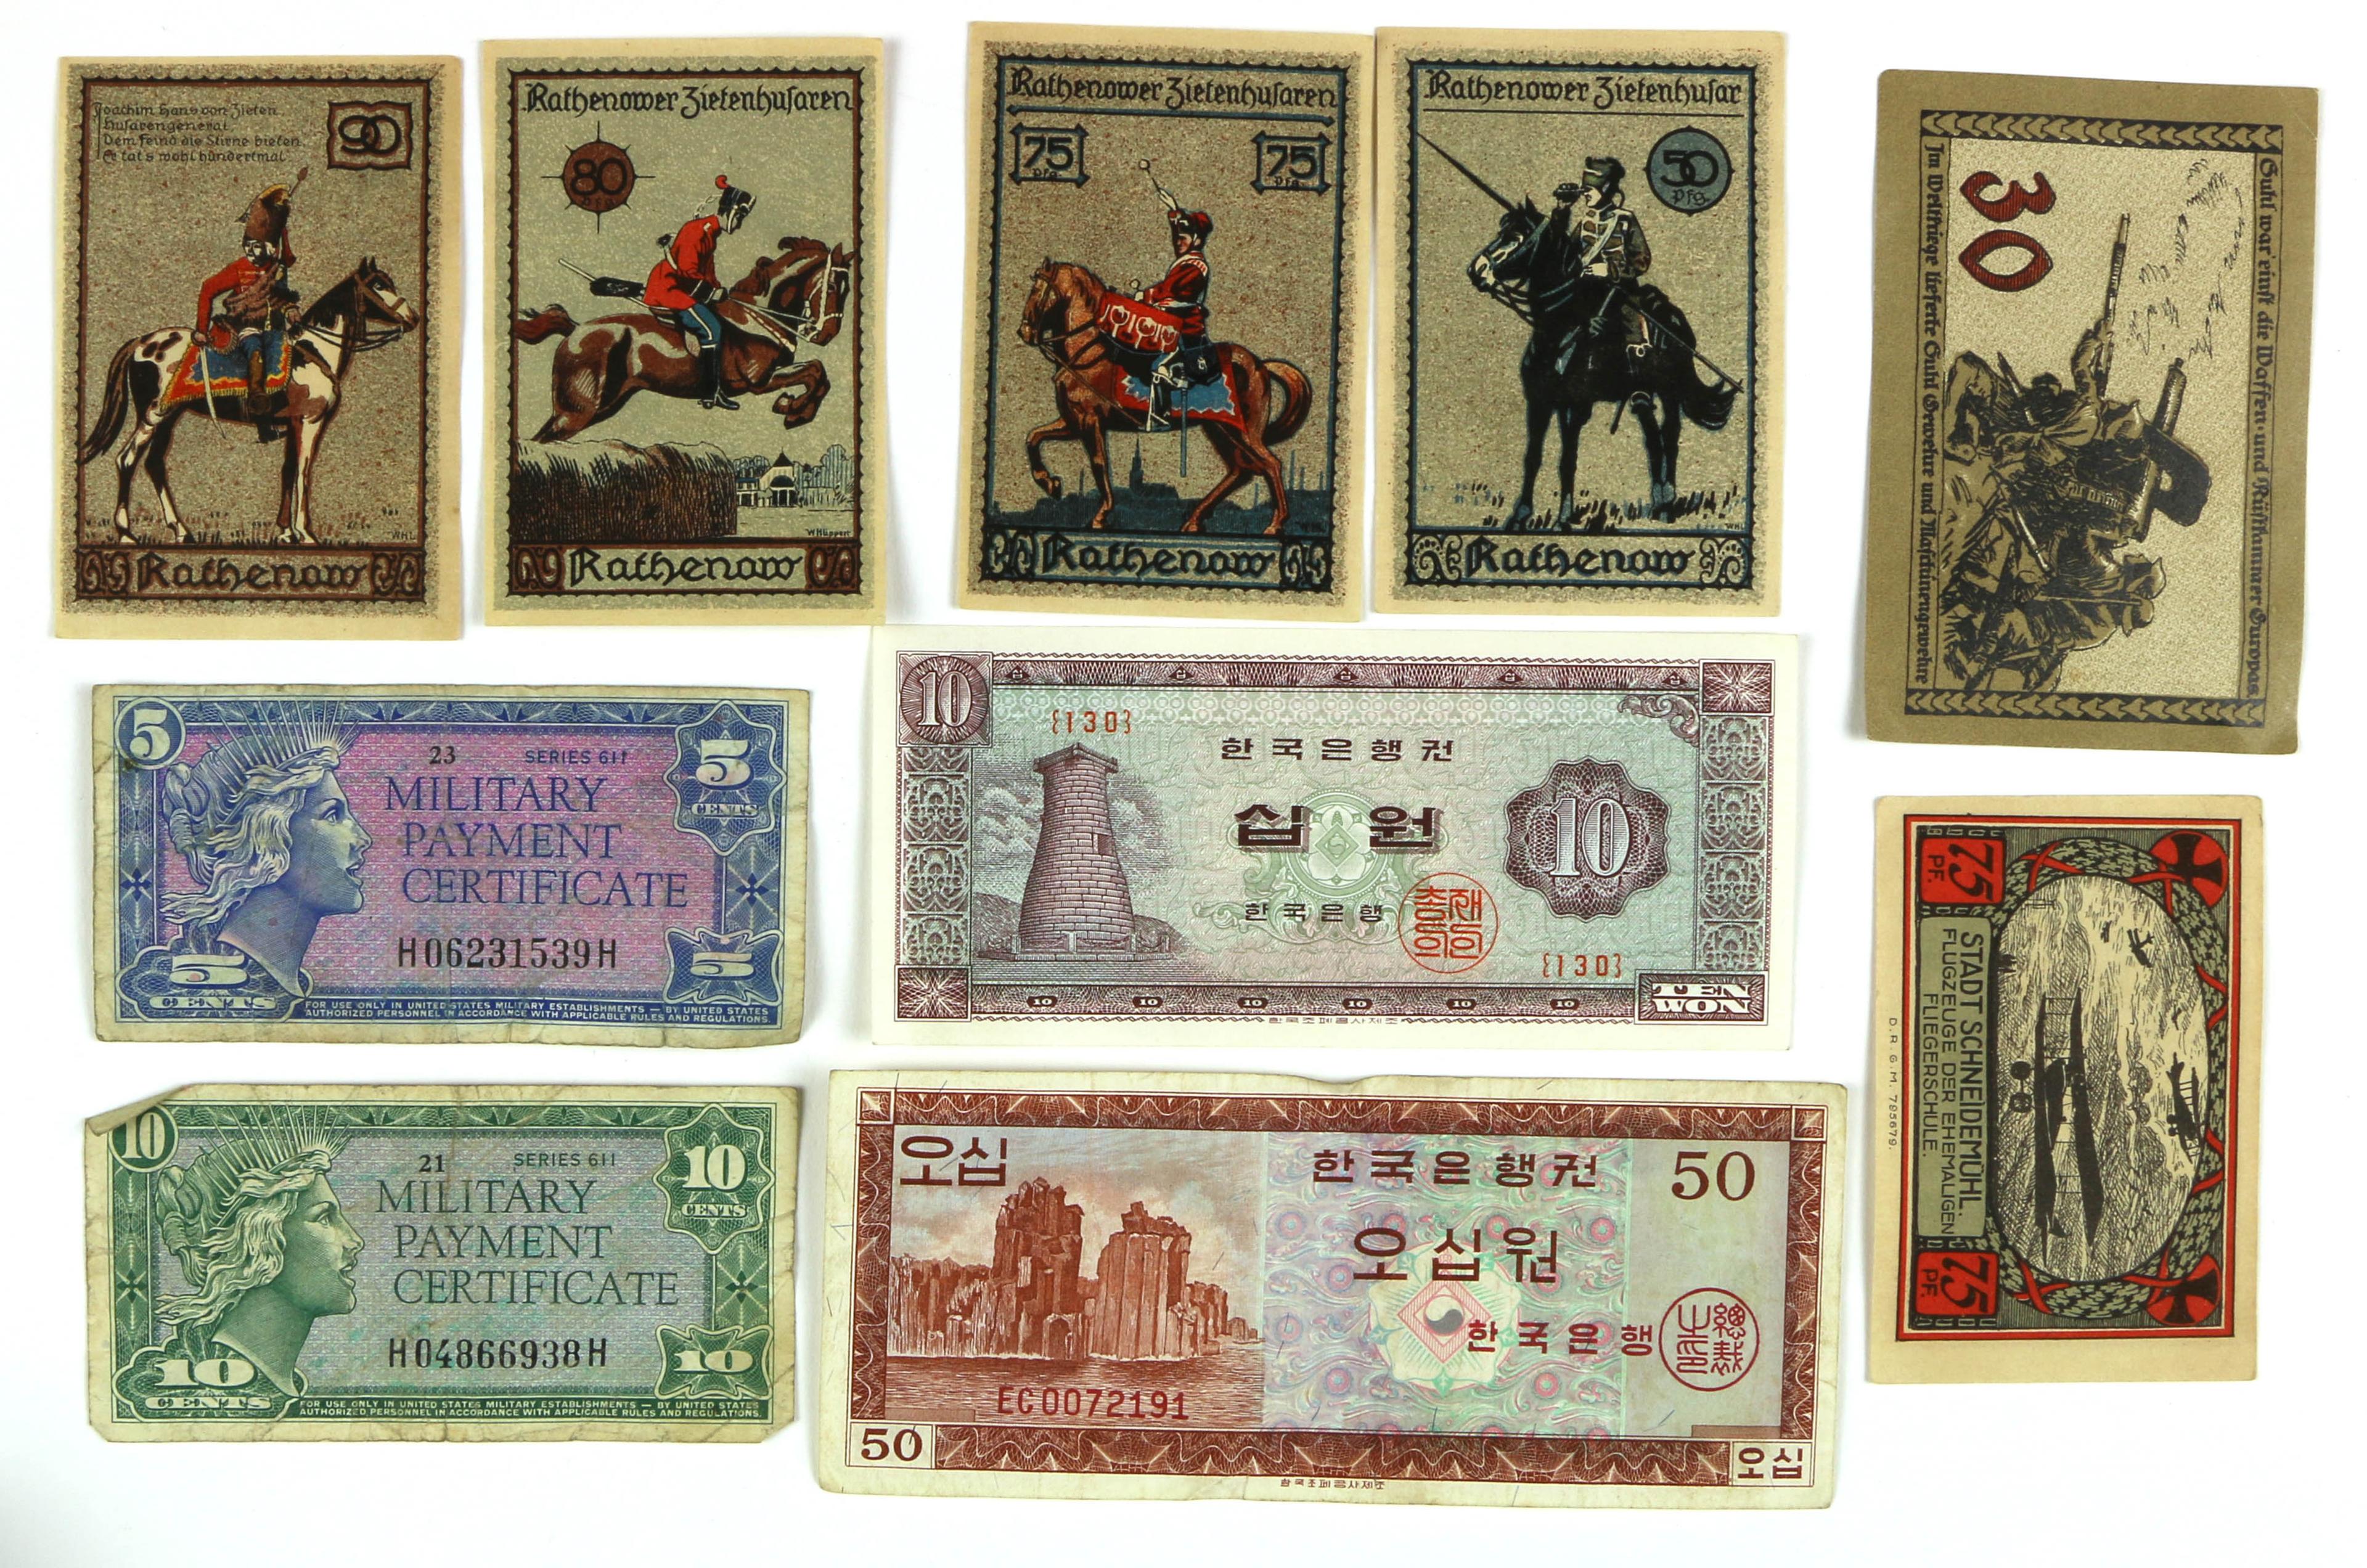 Foreign Currency and Military Payment Certificates